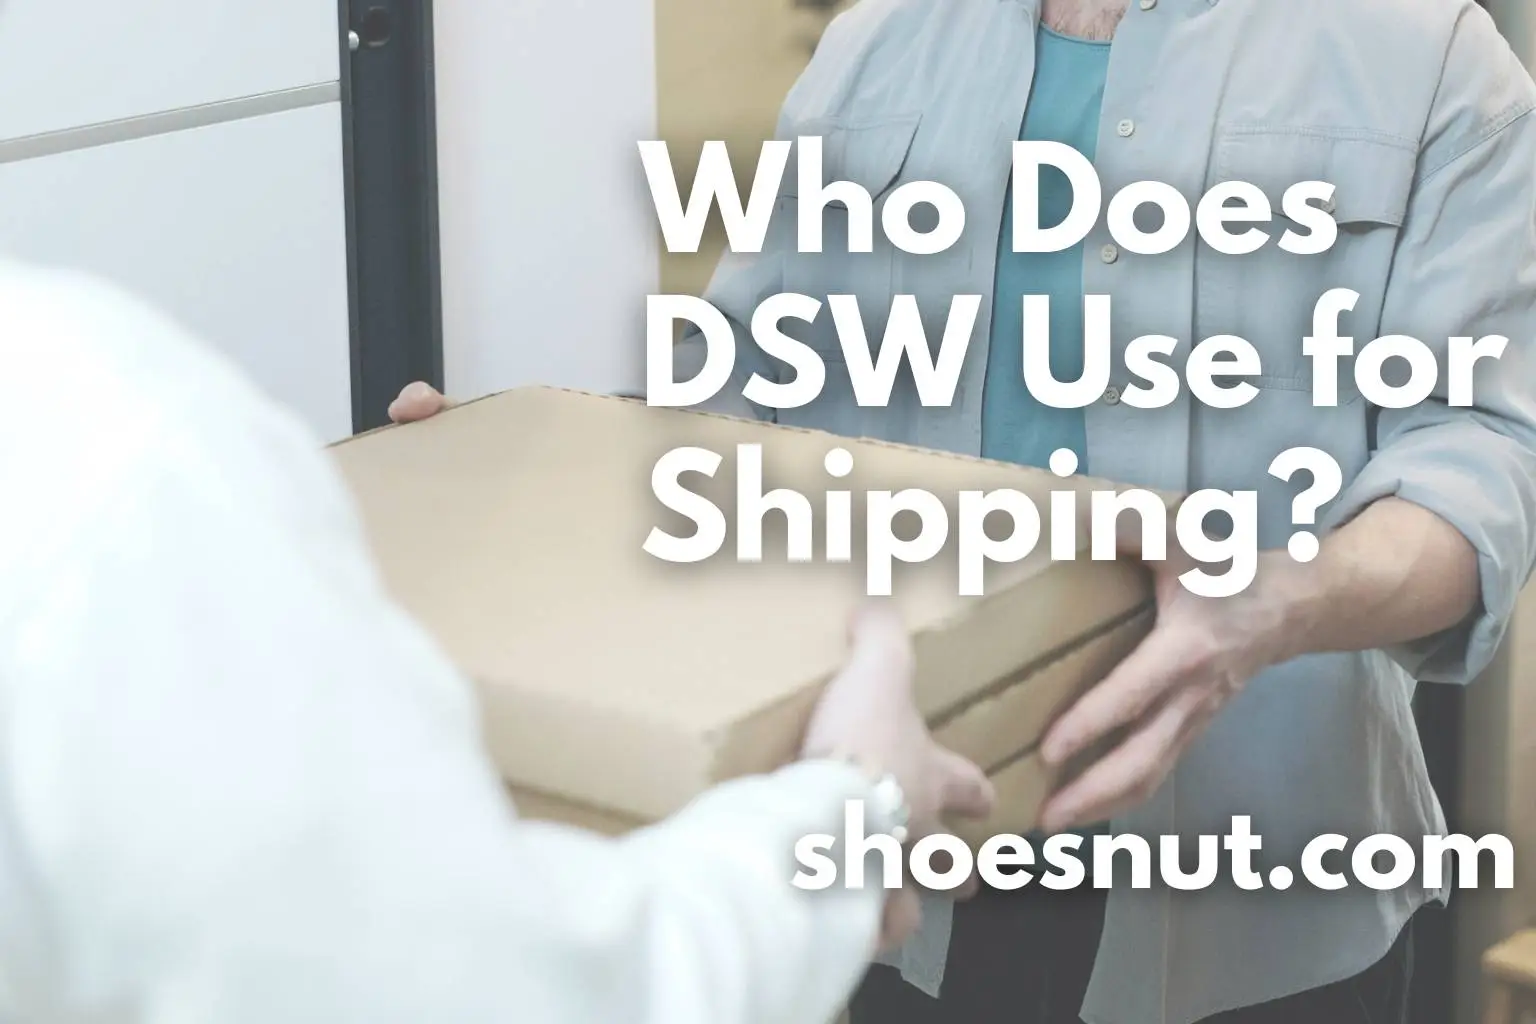 Who Does DSW Use for Shipping?